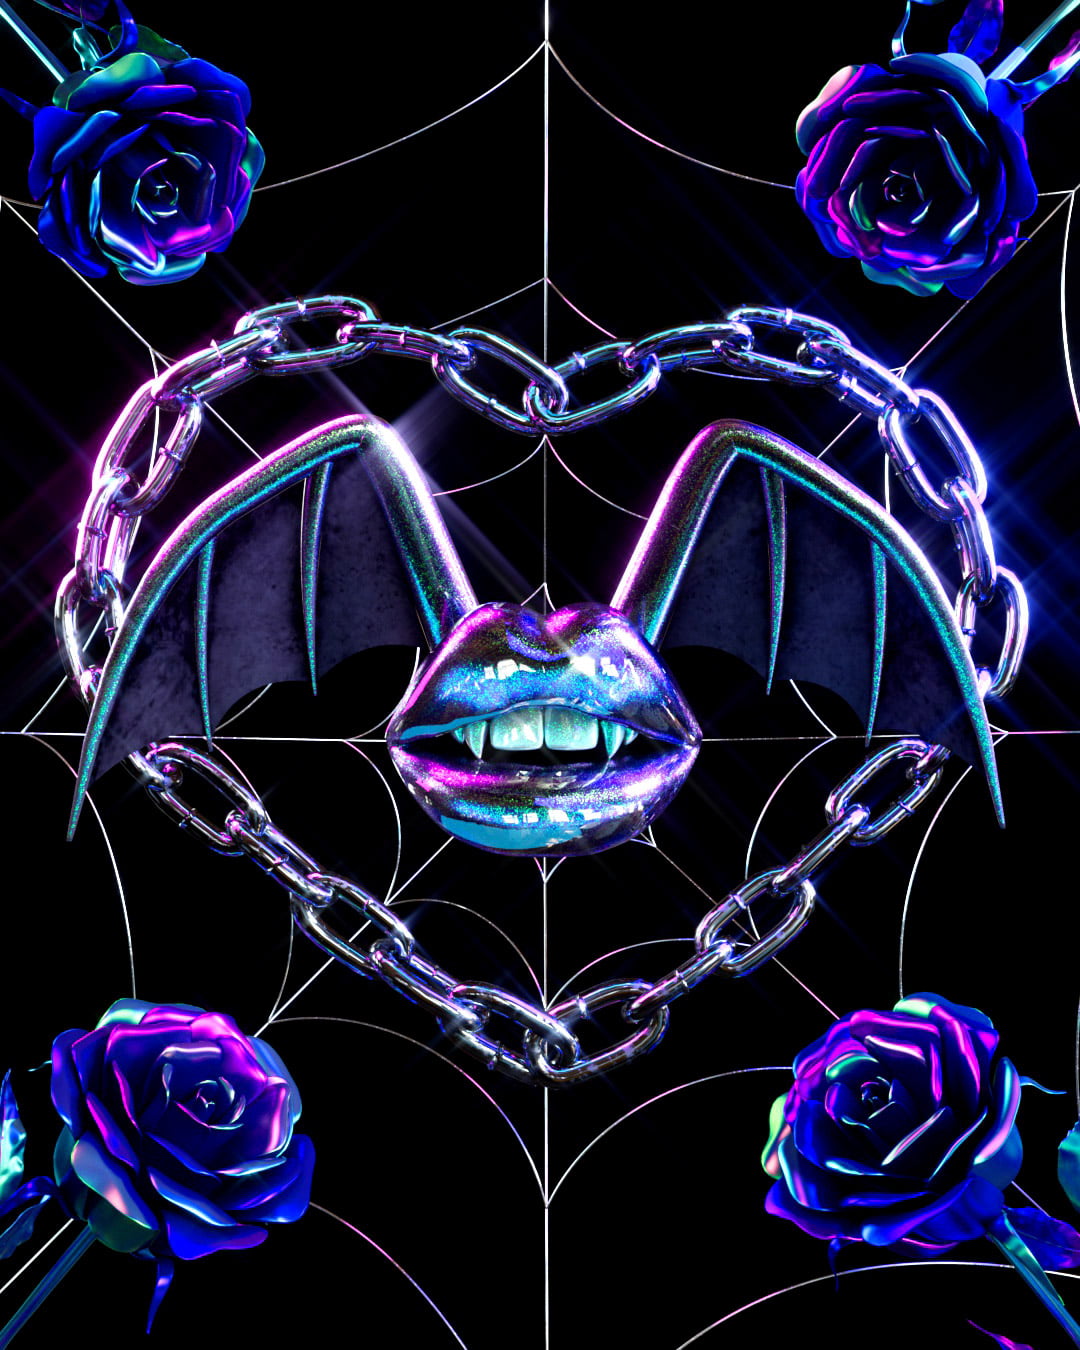 Black background with silver spiderweb filling the space. Metallic iridescent blue/magenta roses on all corners. A silver heart shaped chain in the center framing chrome lipstick lips with fangs and chrome and black webbed bat wings.